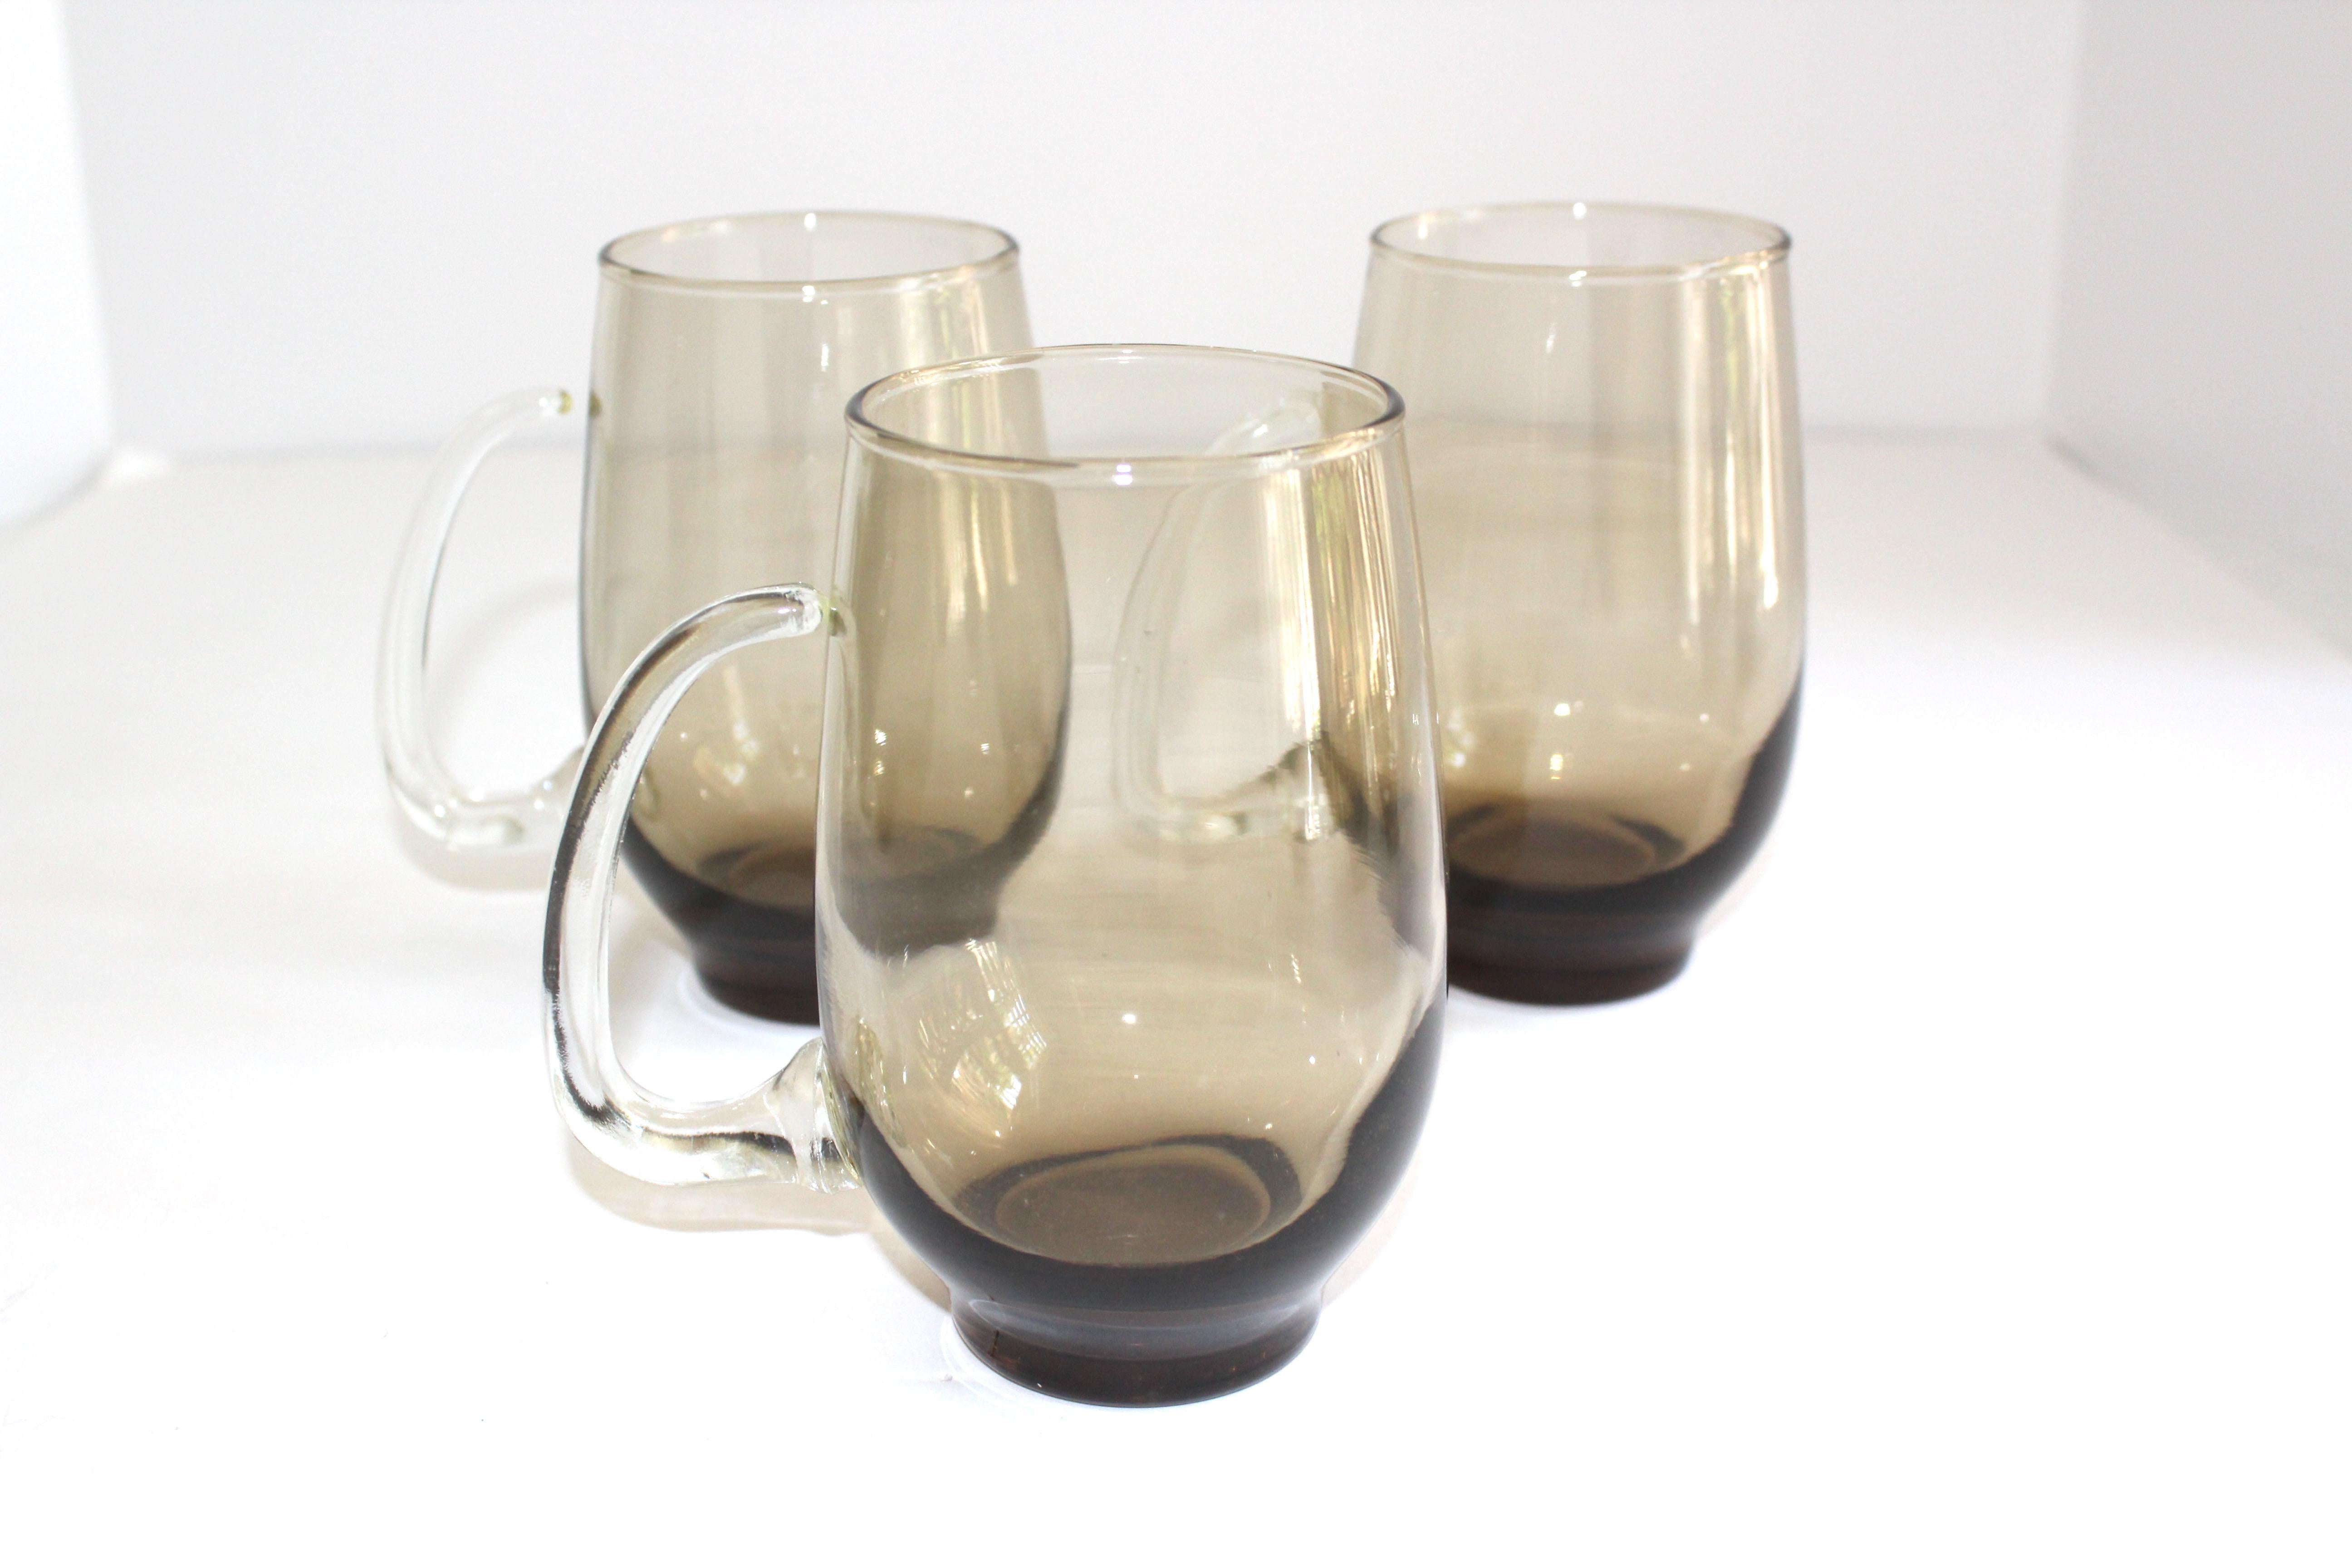 American Set of Six Mid-Century Modern Tinted Glass Mugs by Libbey Glass Co.